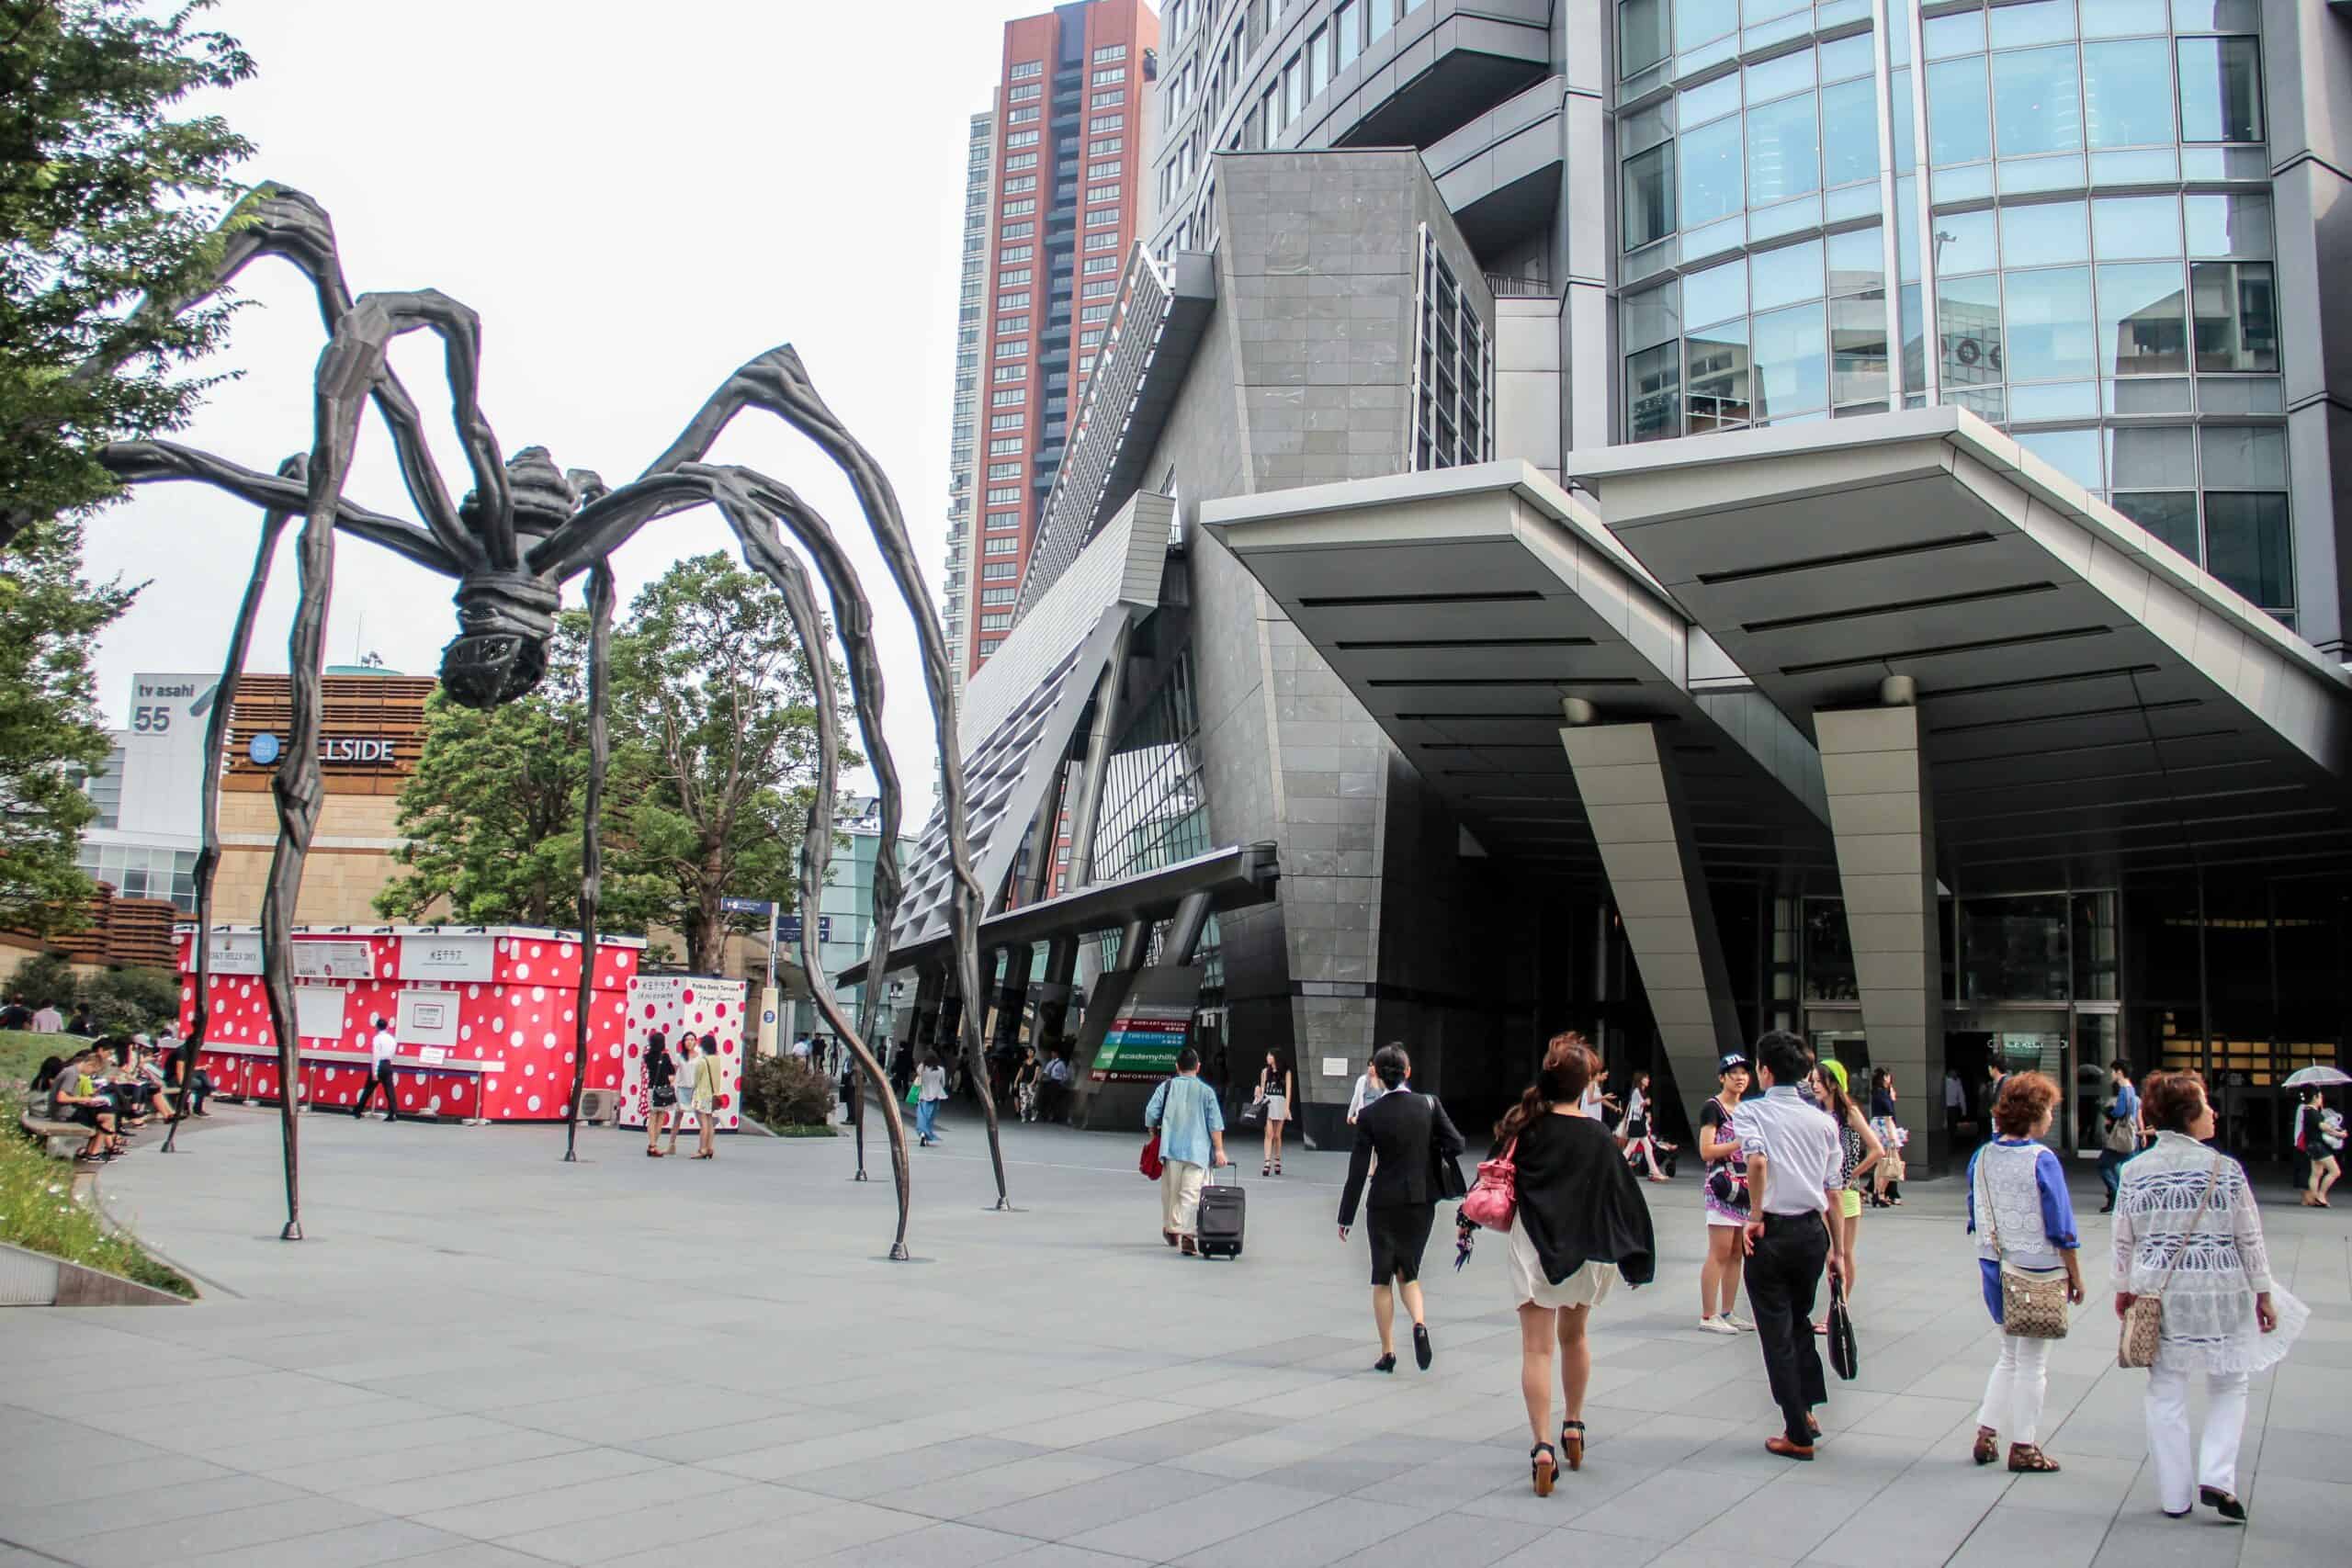 A giant, metal spider art structure outside the Mori Art Museum in Tokyo.